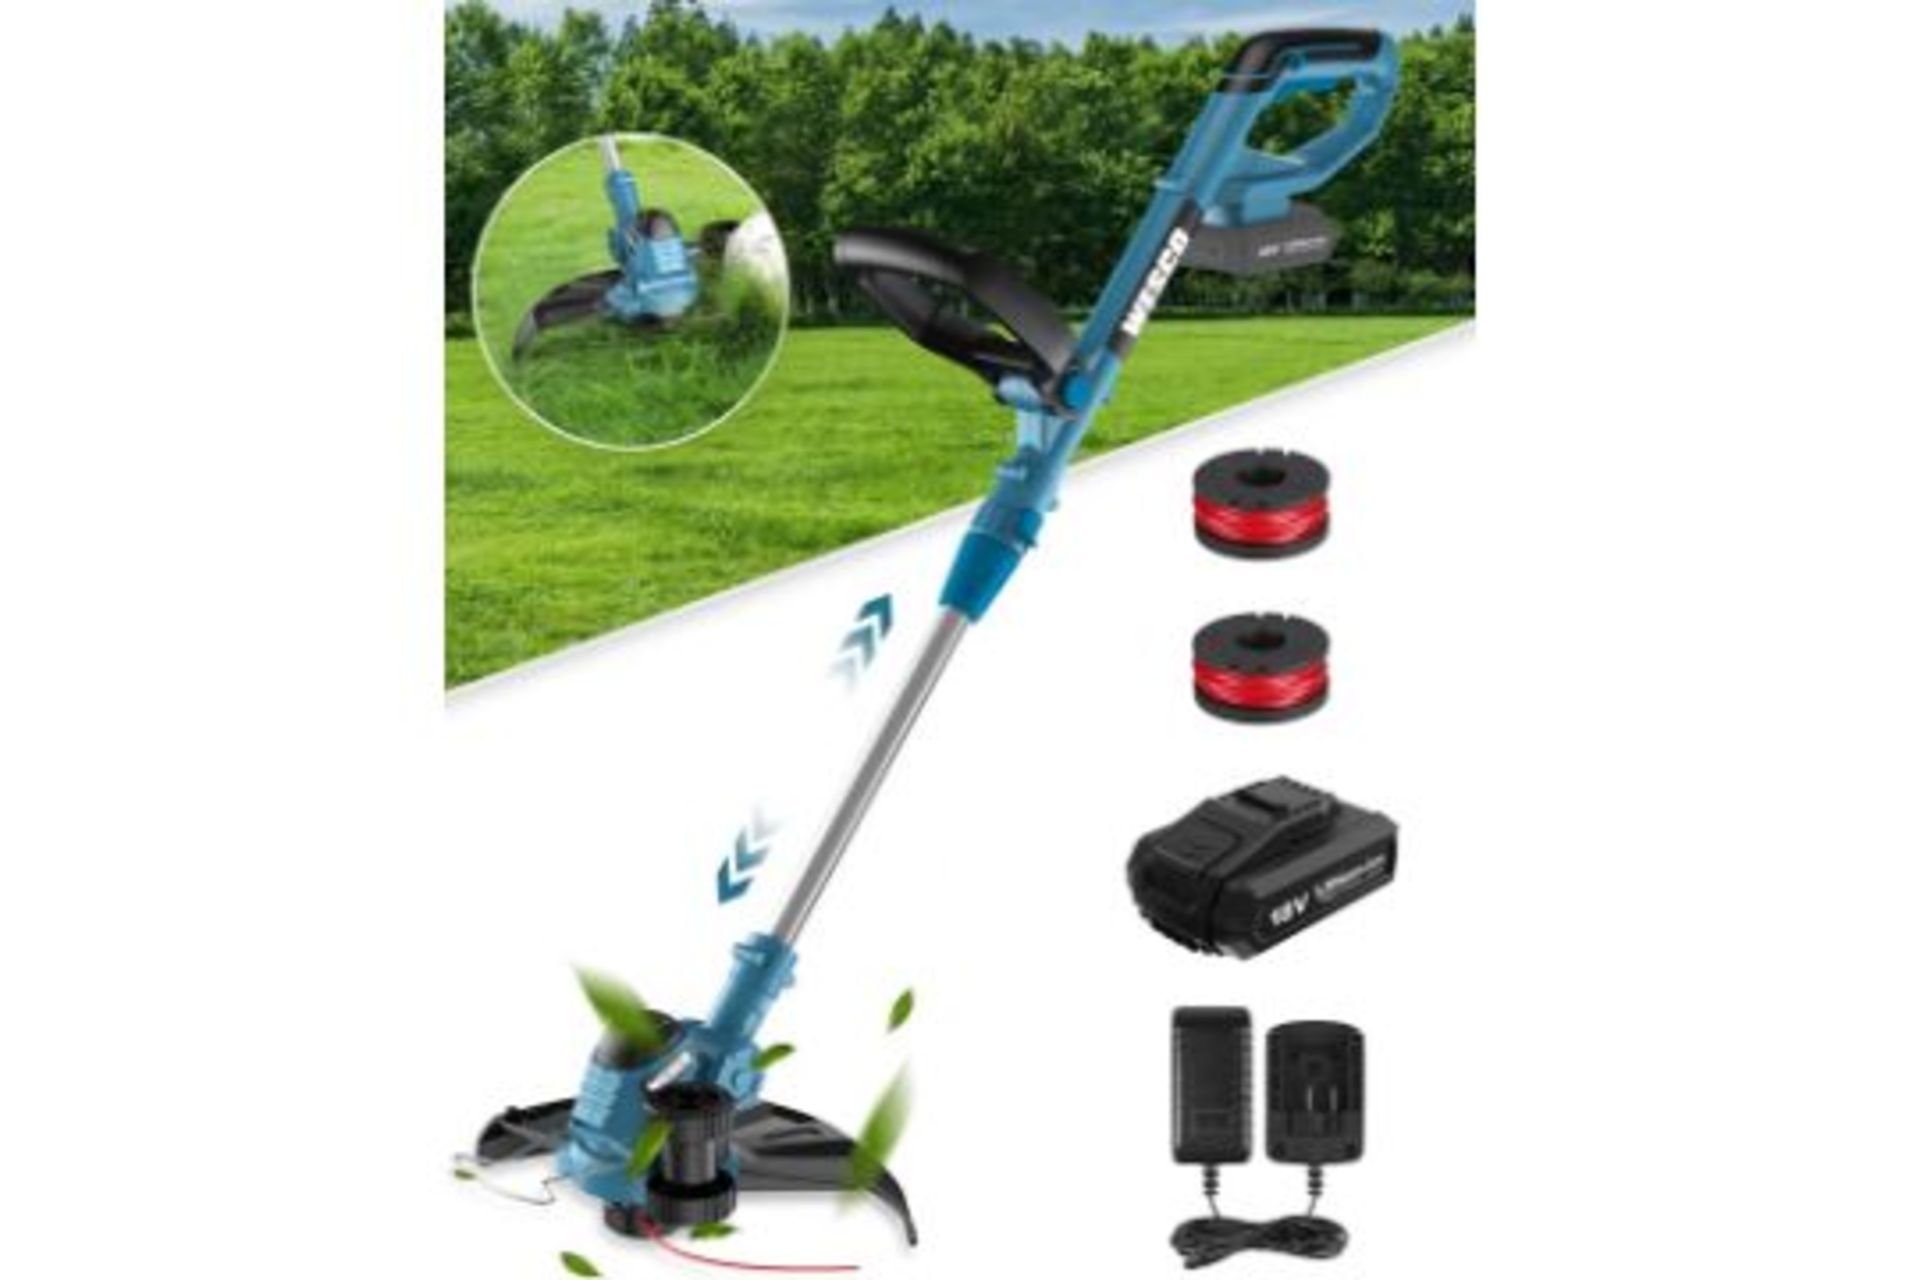 New Boxed WESCO Cordless 2 in 1 Electric String Trimmer/Edger 18V with 2.0Ah Battery, Cutting